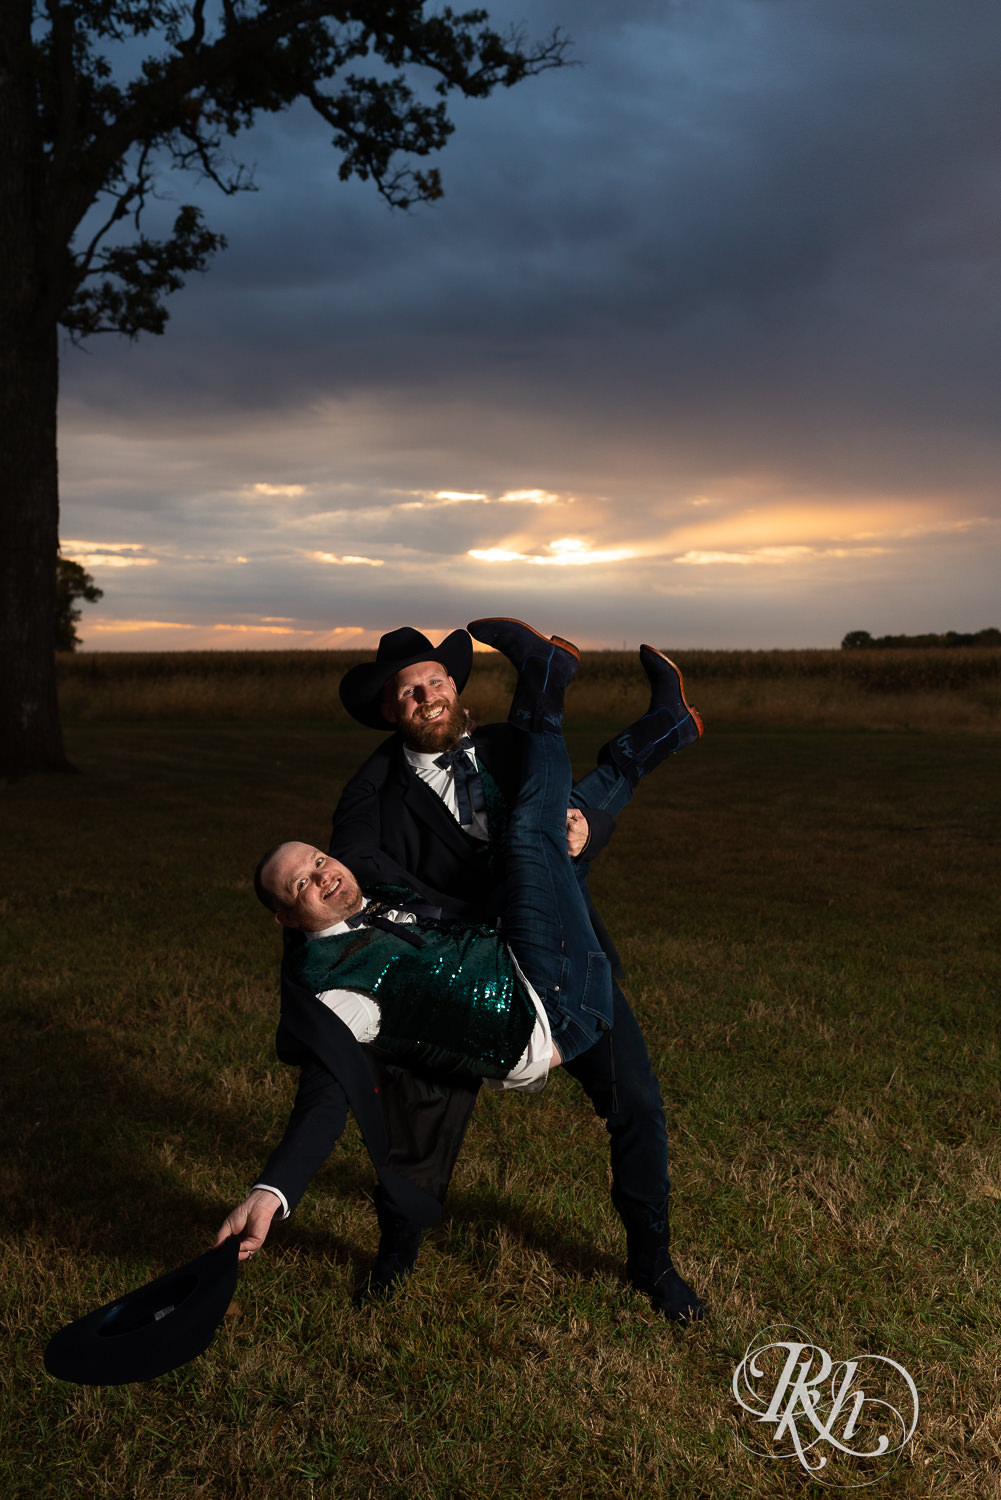 Groom carrying other groom during sunset on their wedding day.